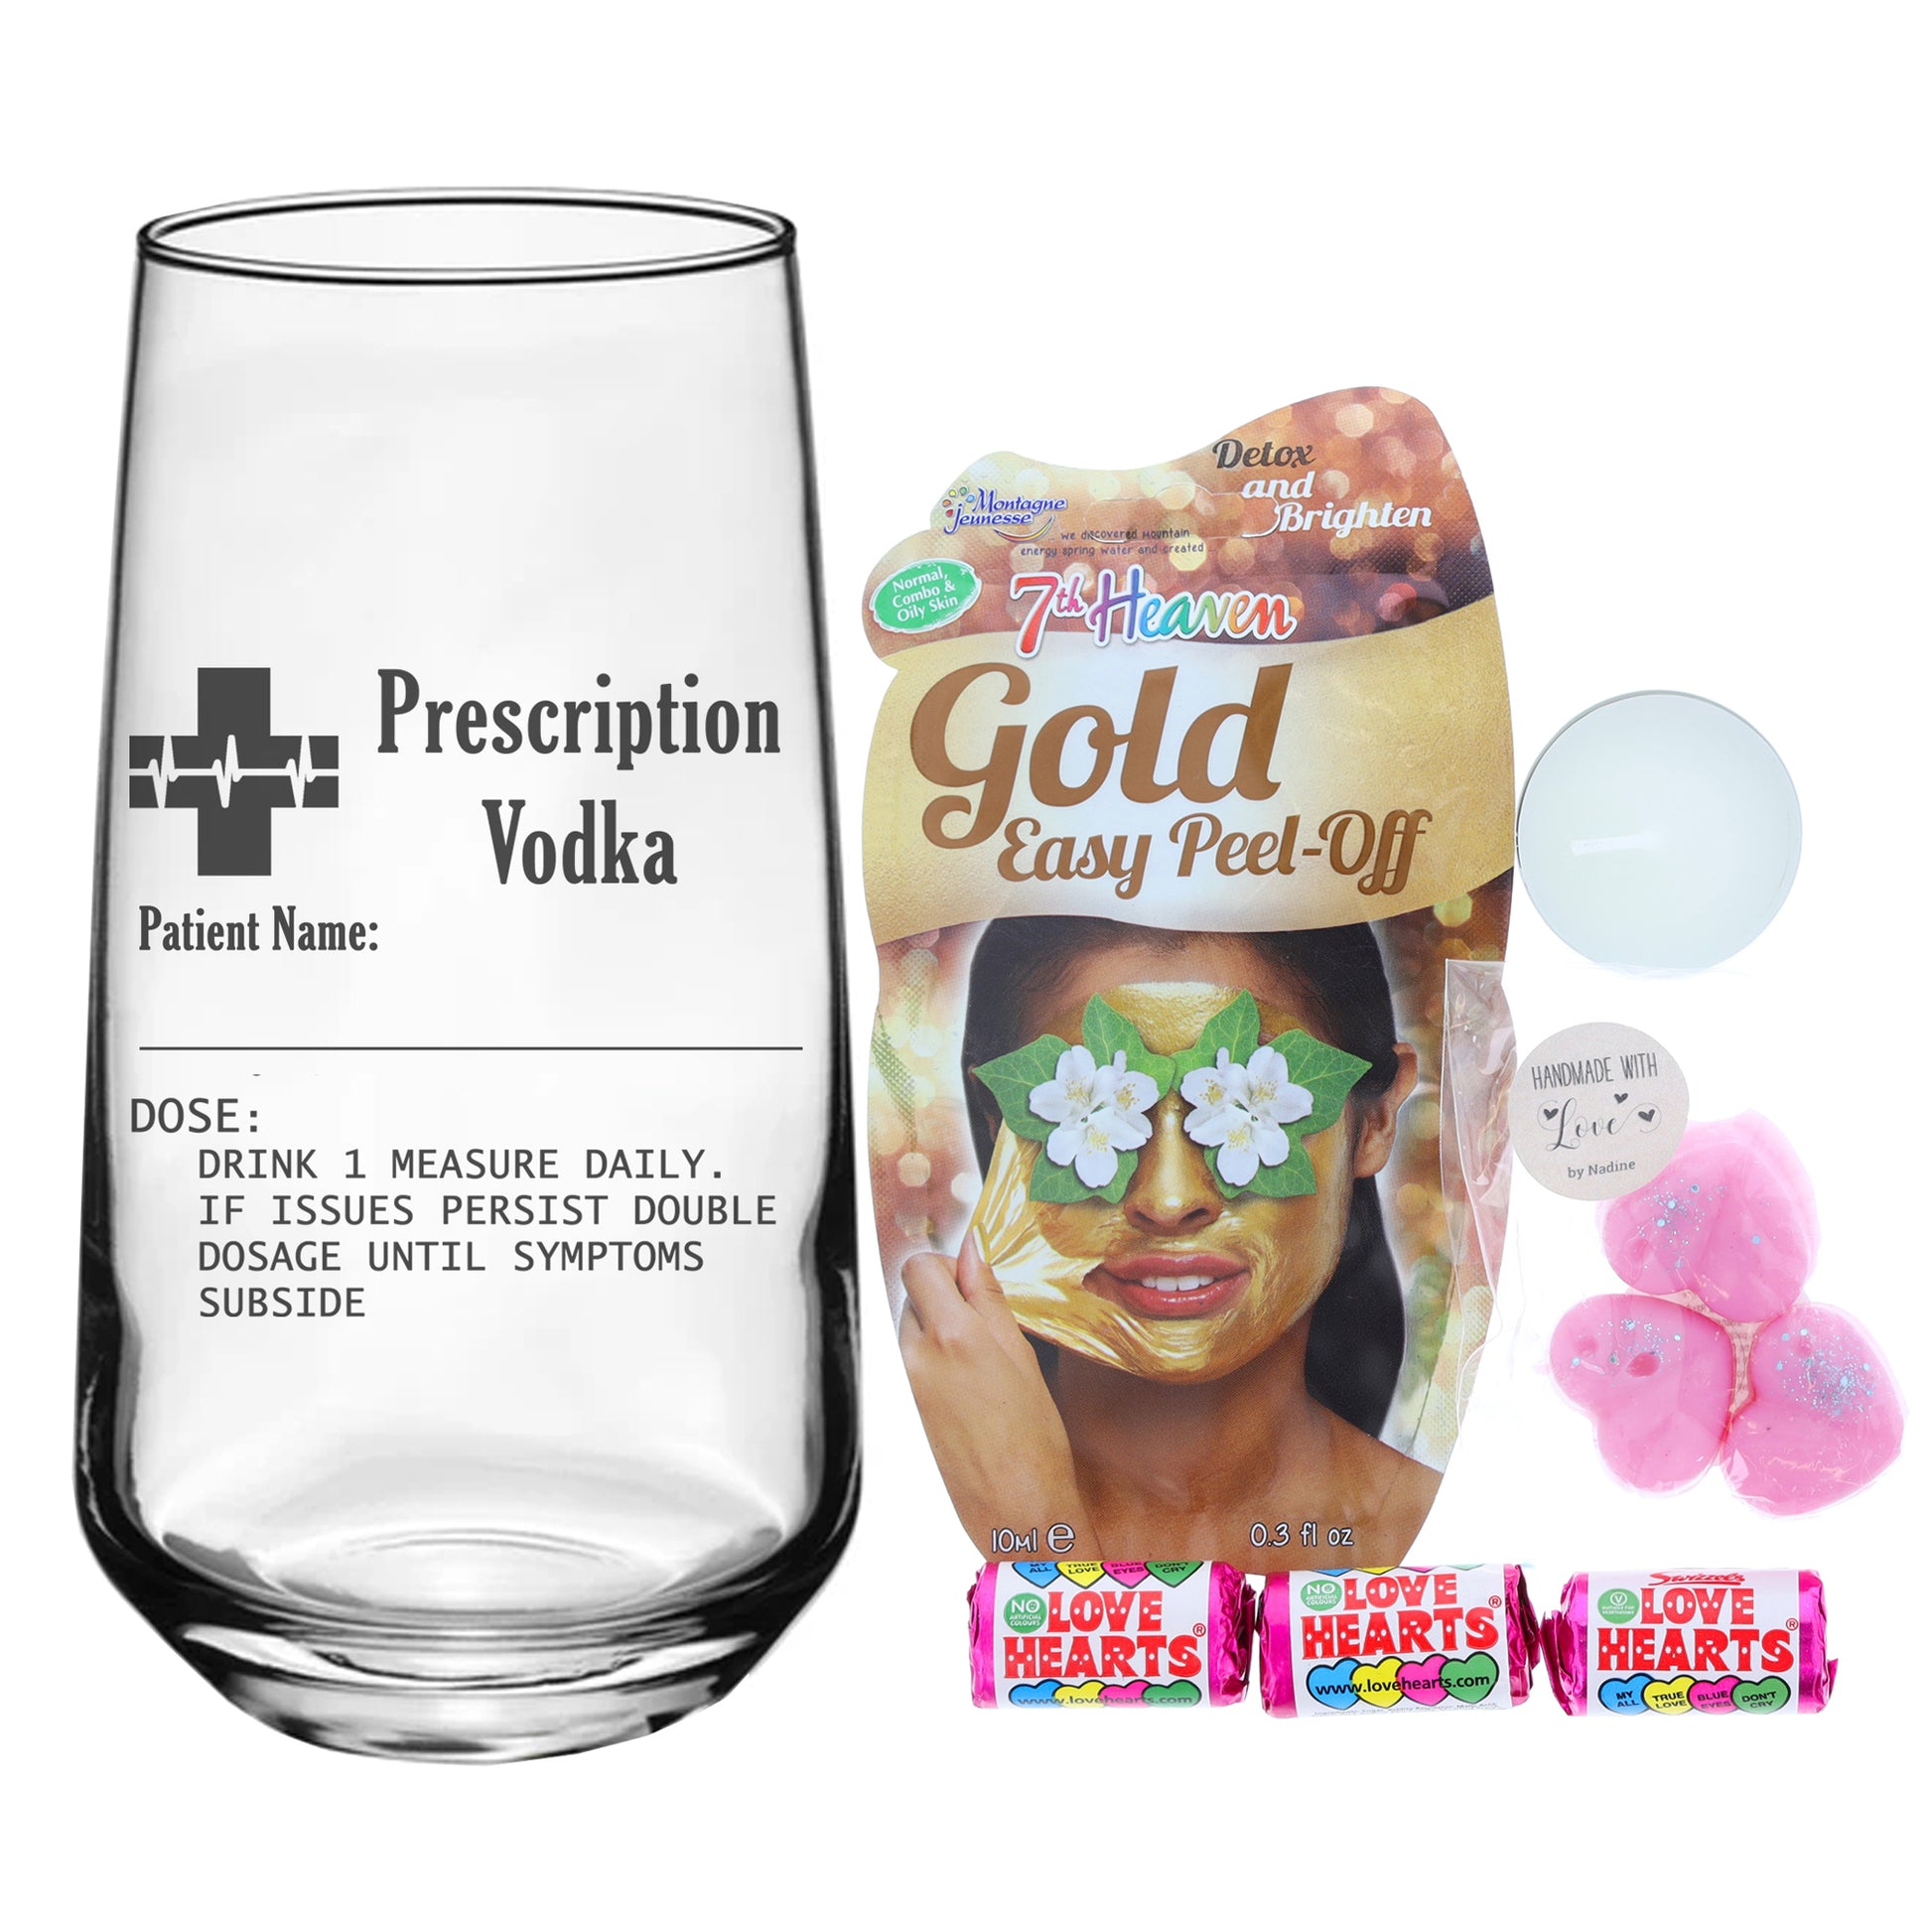 Personalised Engraved Prescription Vodka Glass with any Name  - Always Looking Good - Filled with Ladies Pamper Products Large Tallo 